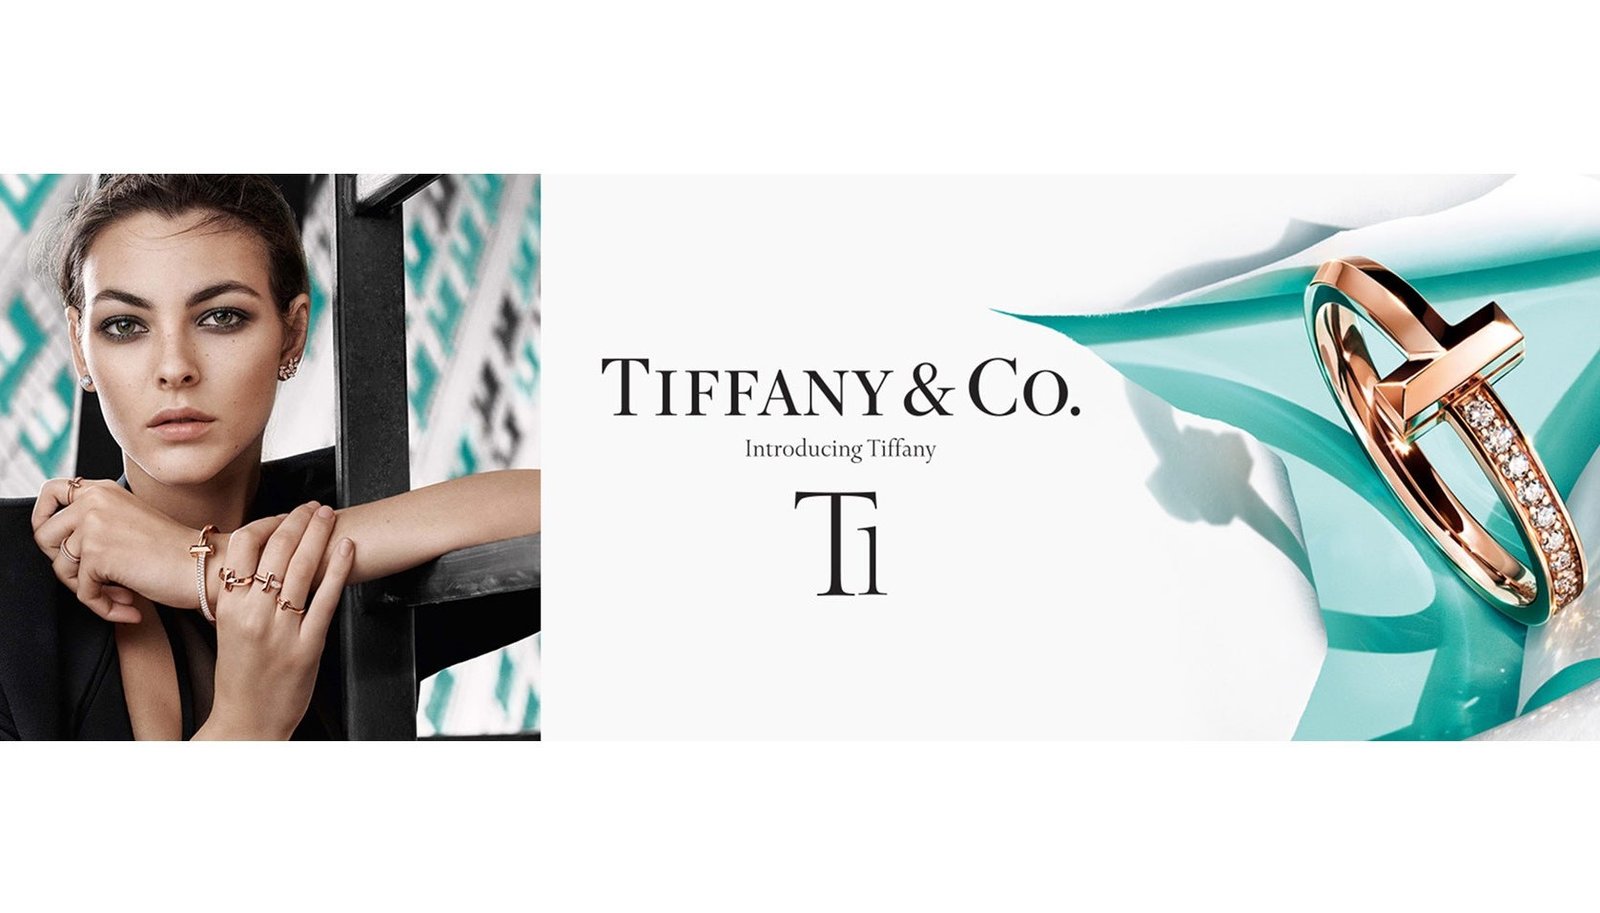 Tiffany and Co SWOT analysis